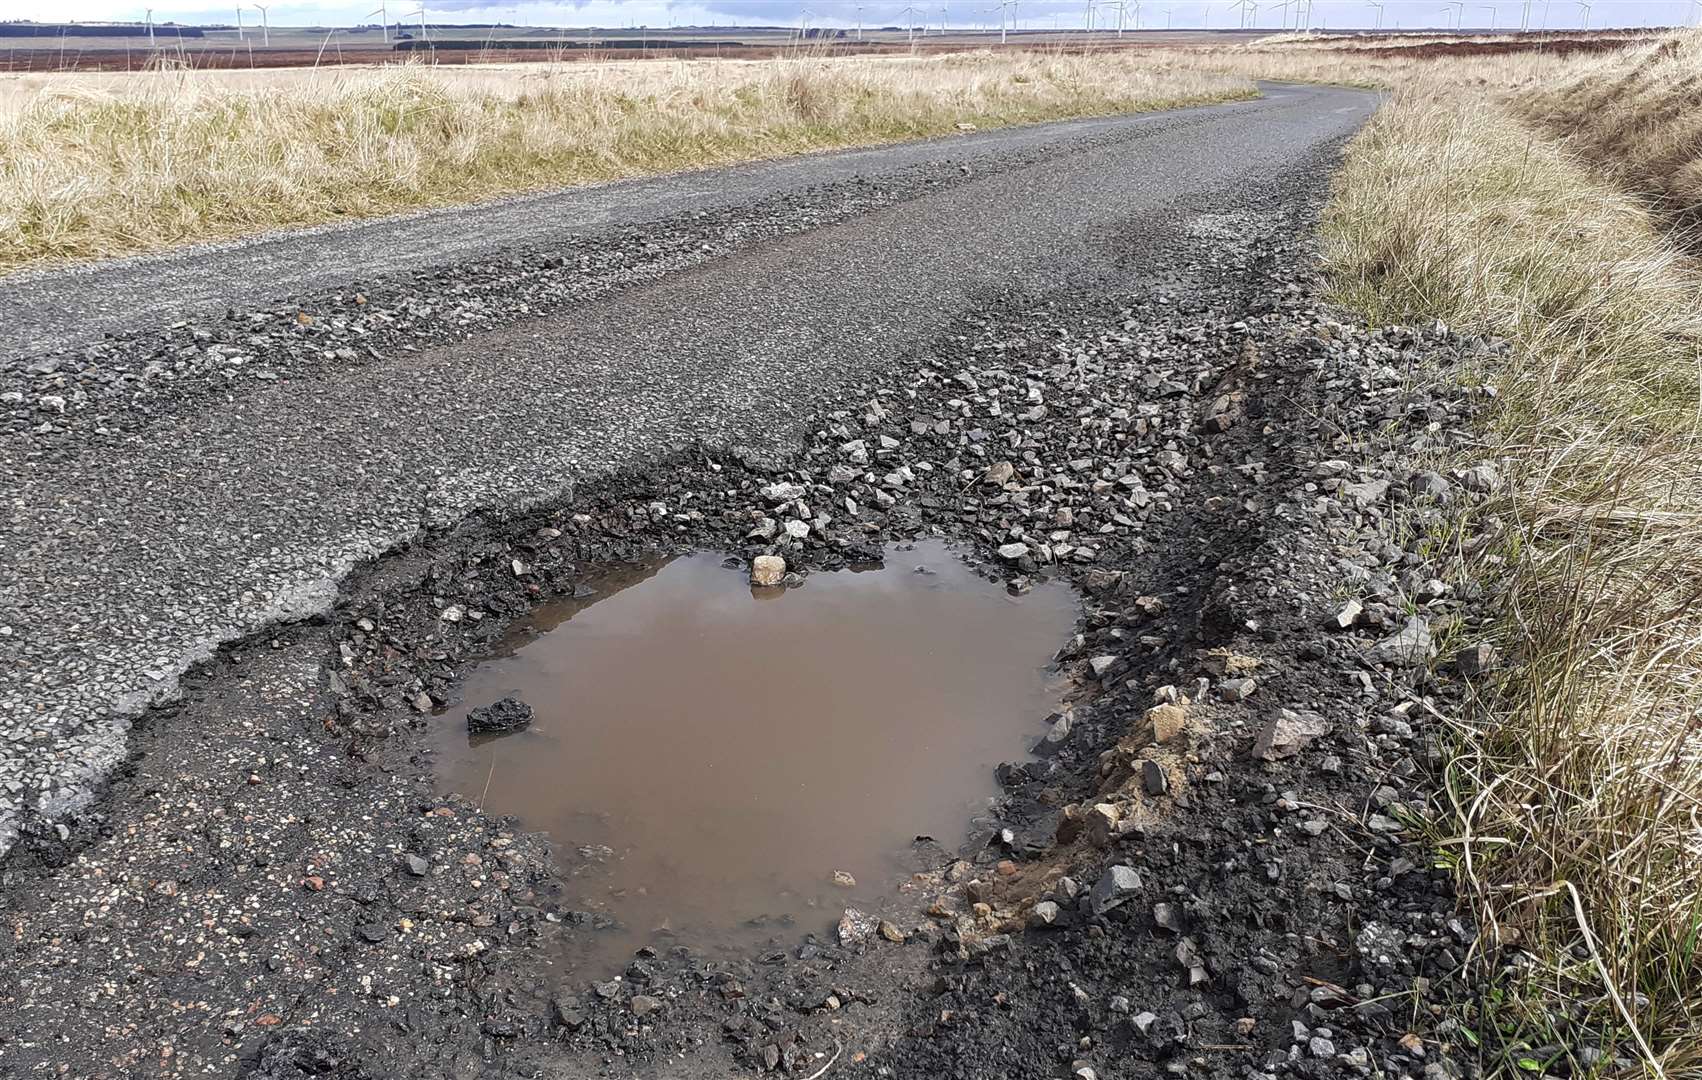 A pothole on a minor road in Caithness with wind turbines in the distance (picture taken earlier this month).